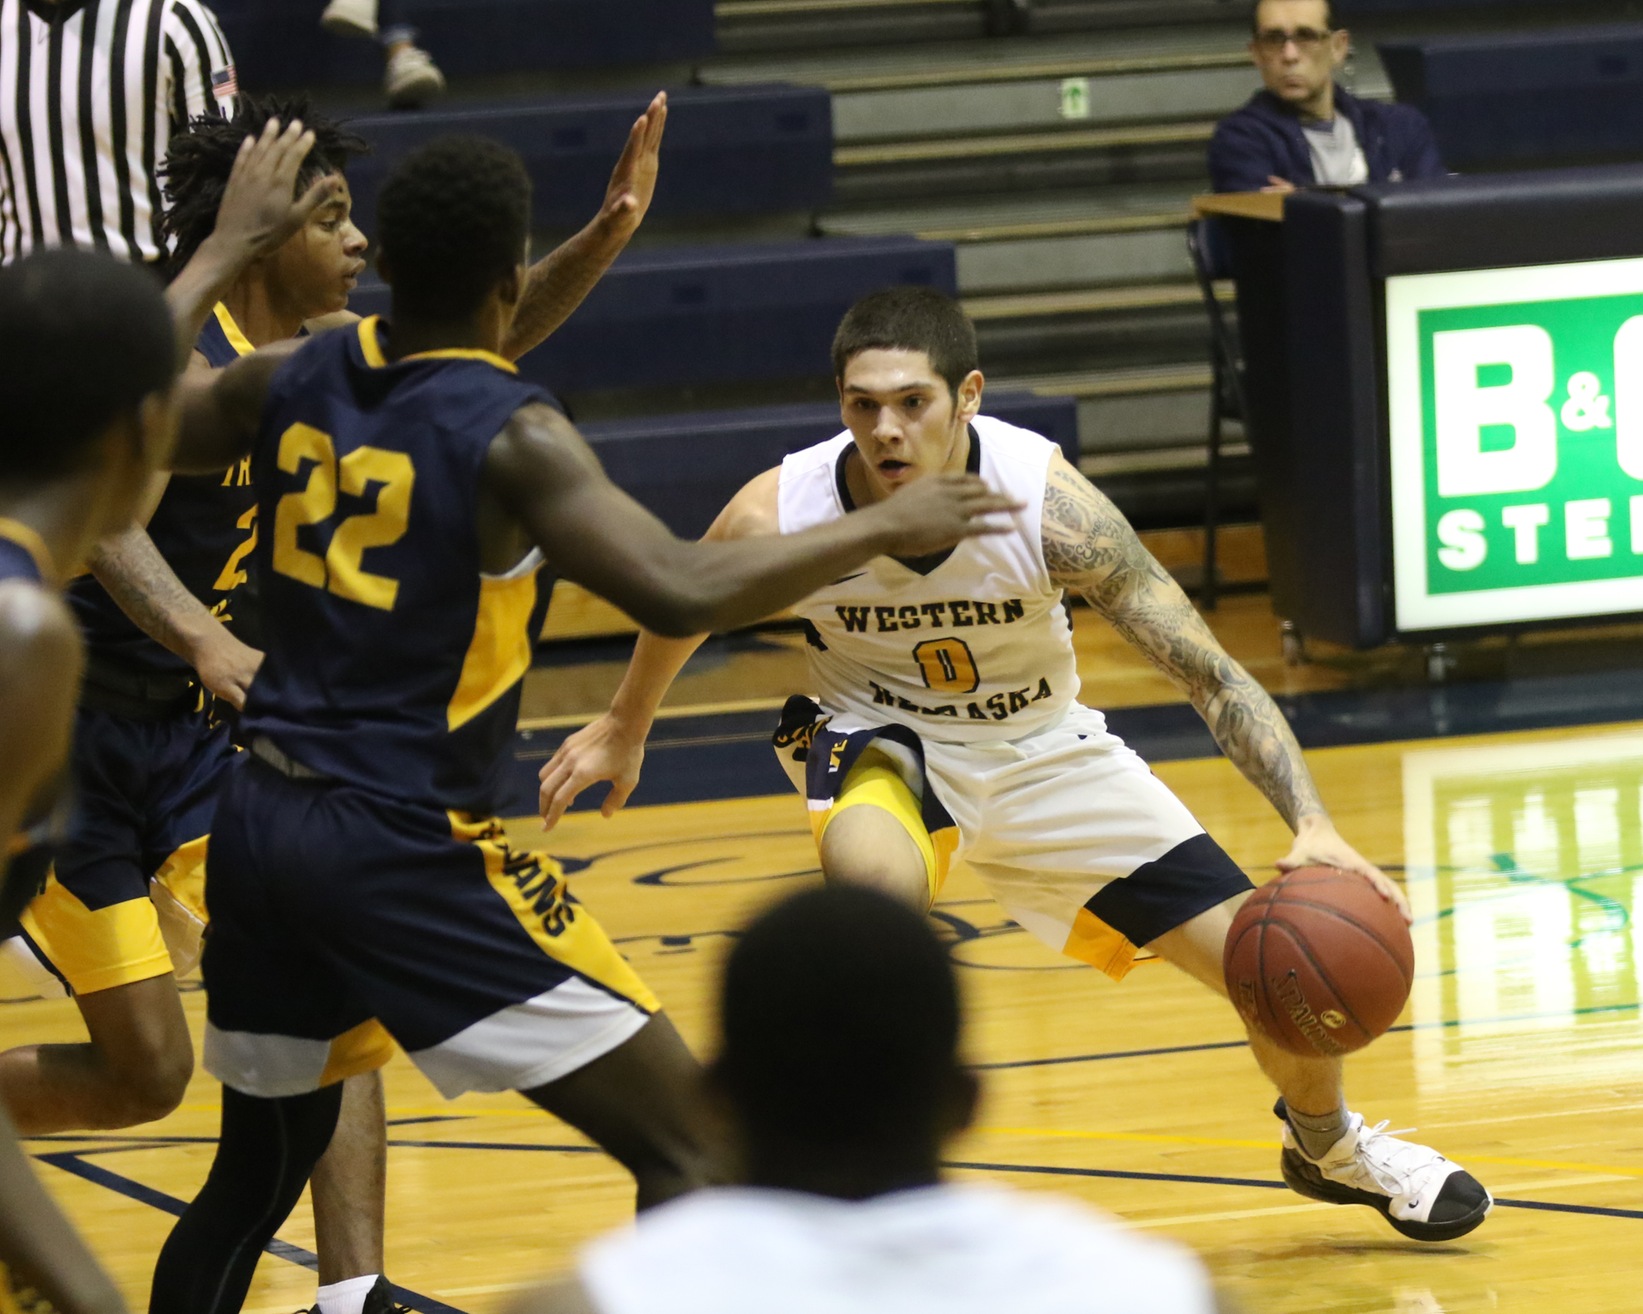 Kuxhausen's 30 helps WNCC regain first place in South